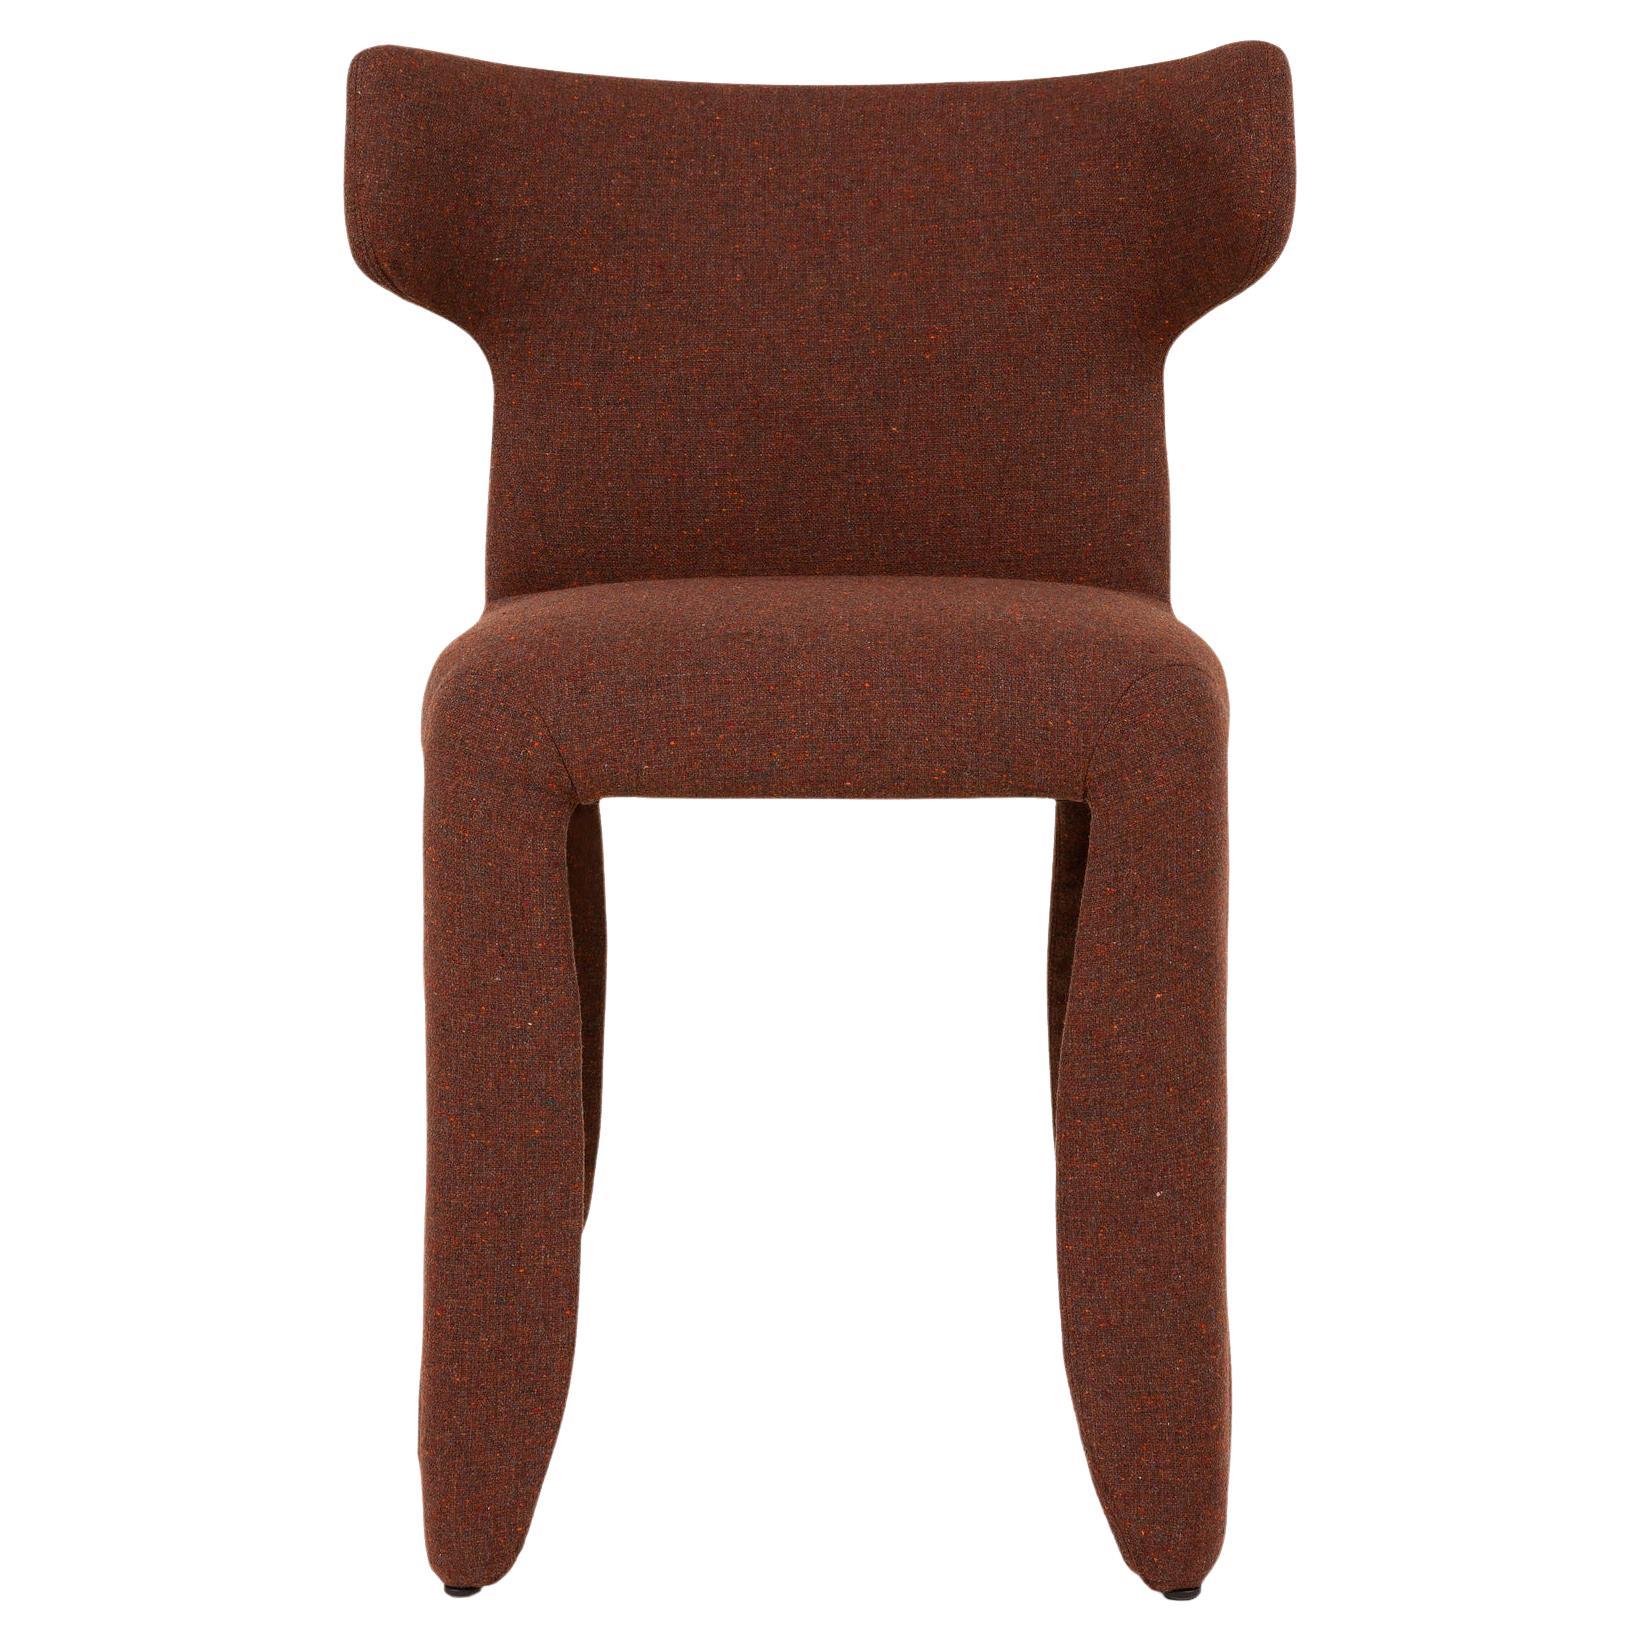 Moooi Monster Naked Chair with Arms in Solis, Sunset Red Upholstery For Sale